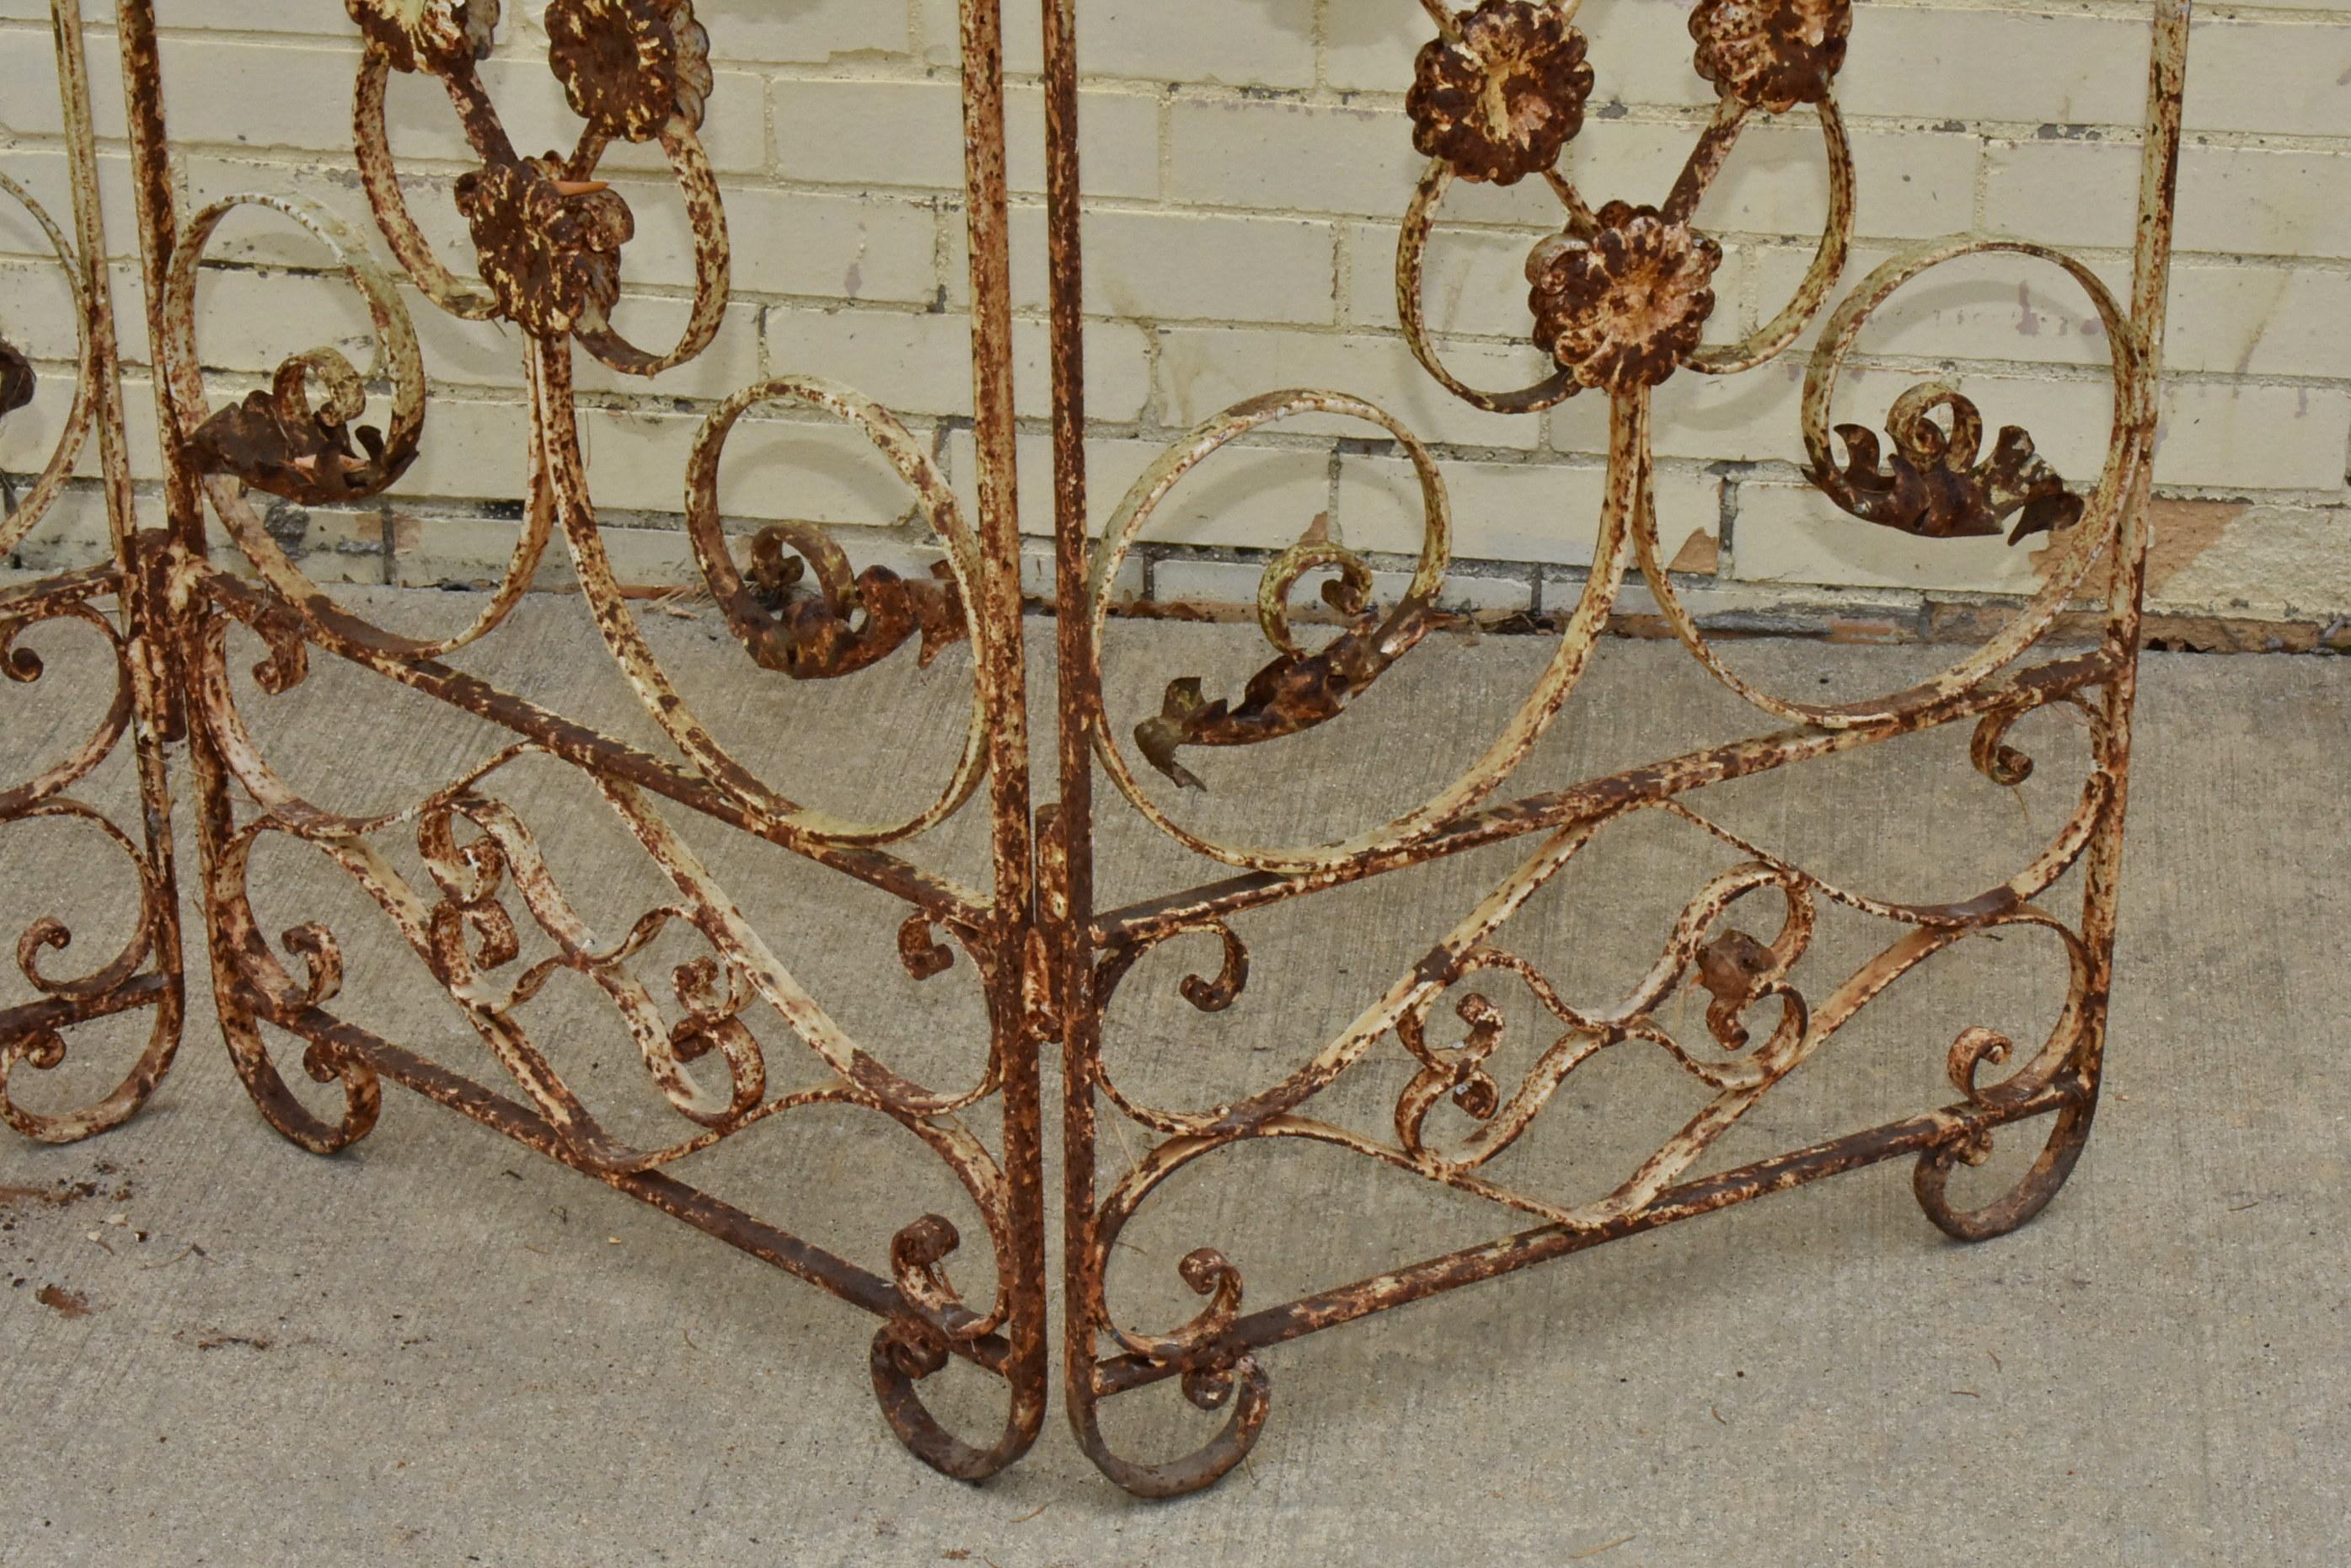 Antique Three Section Folding Screen. Circa 1940's. Iron rustic condition, hinged screen with three panels. Each panel is 20